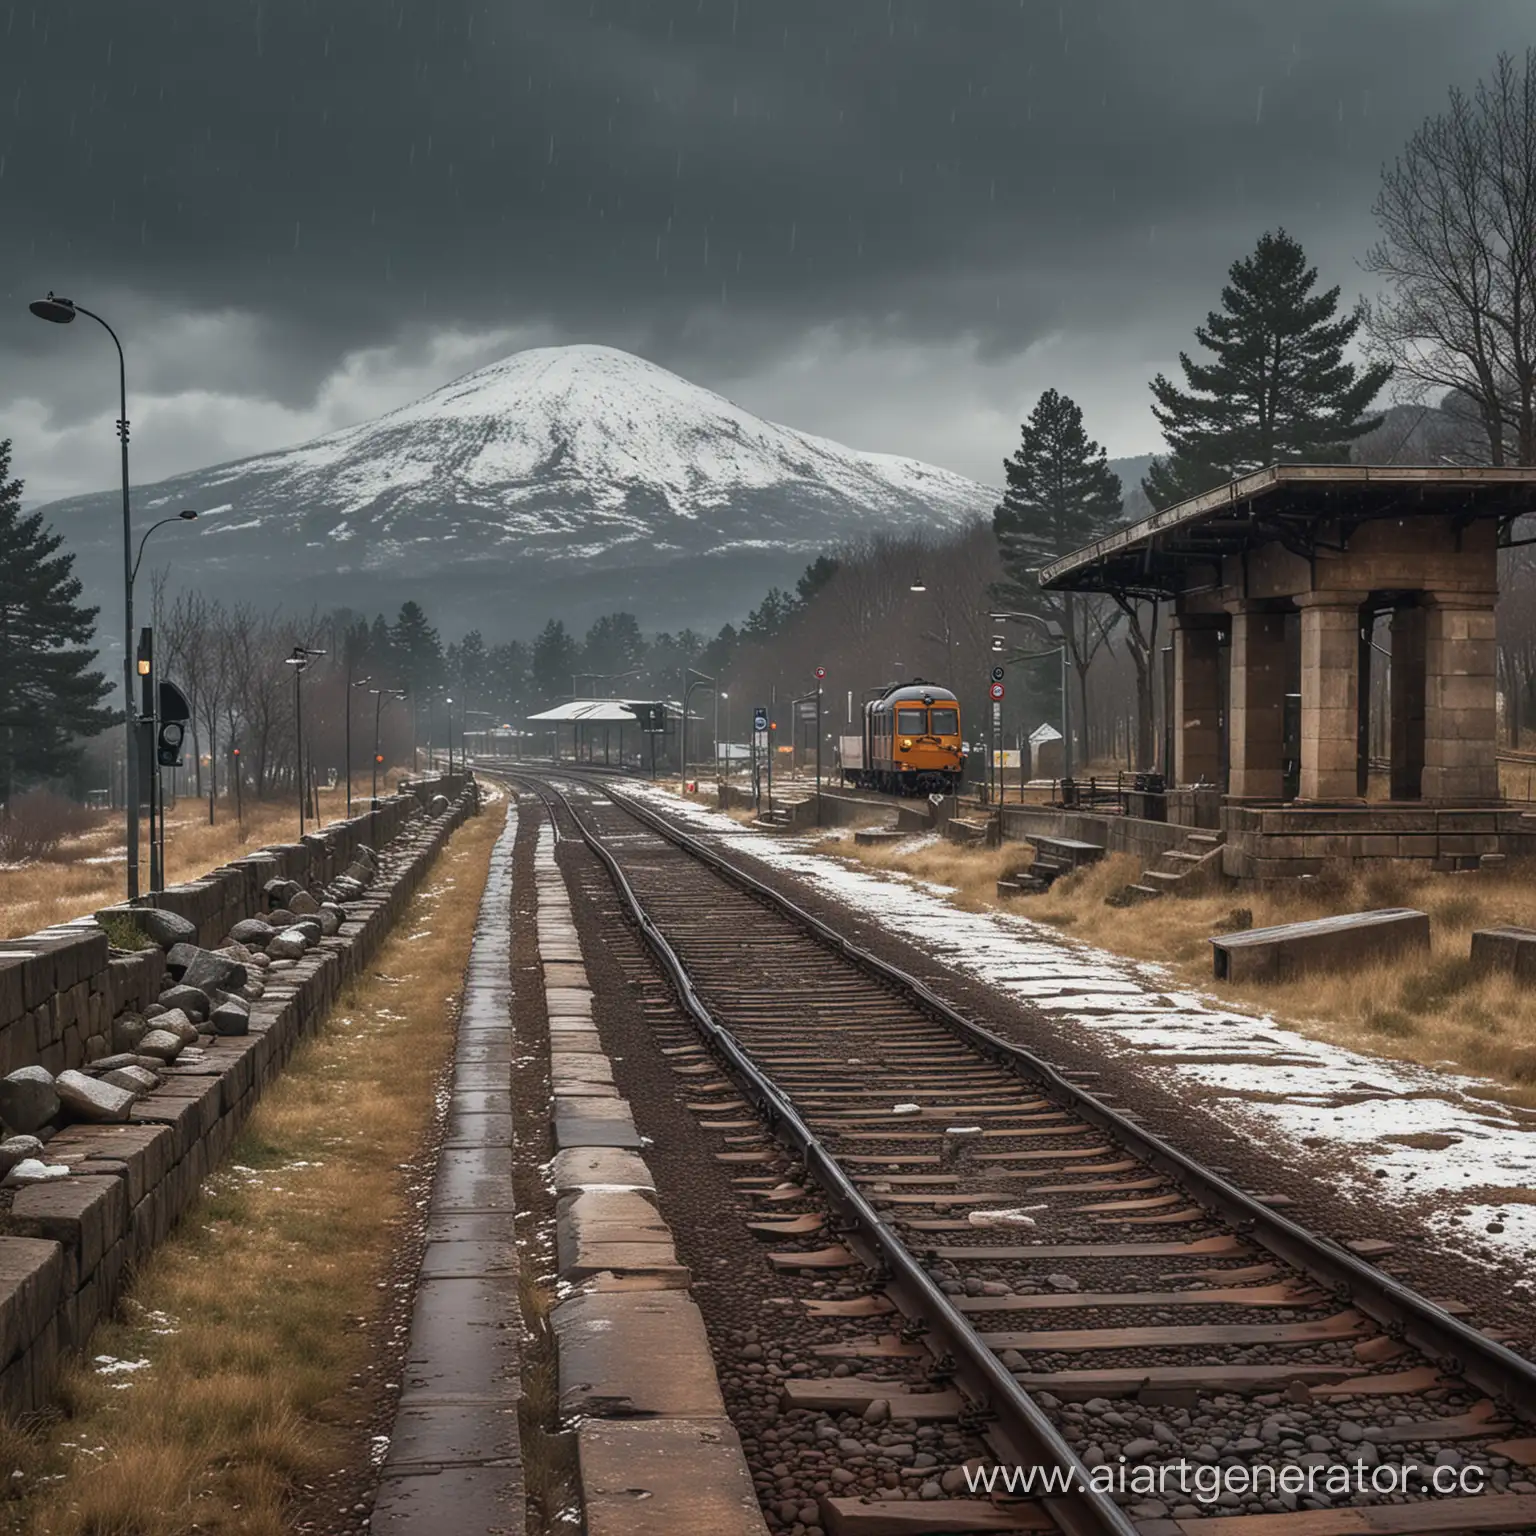 A railway platform in Forum Clodii, train arriving, stylized pagan, Etruscan temple, snowy mountains in the horizon, evening, gale, hail, forest, hi-tec and nature, rocks